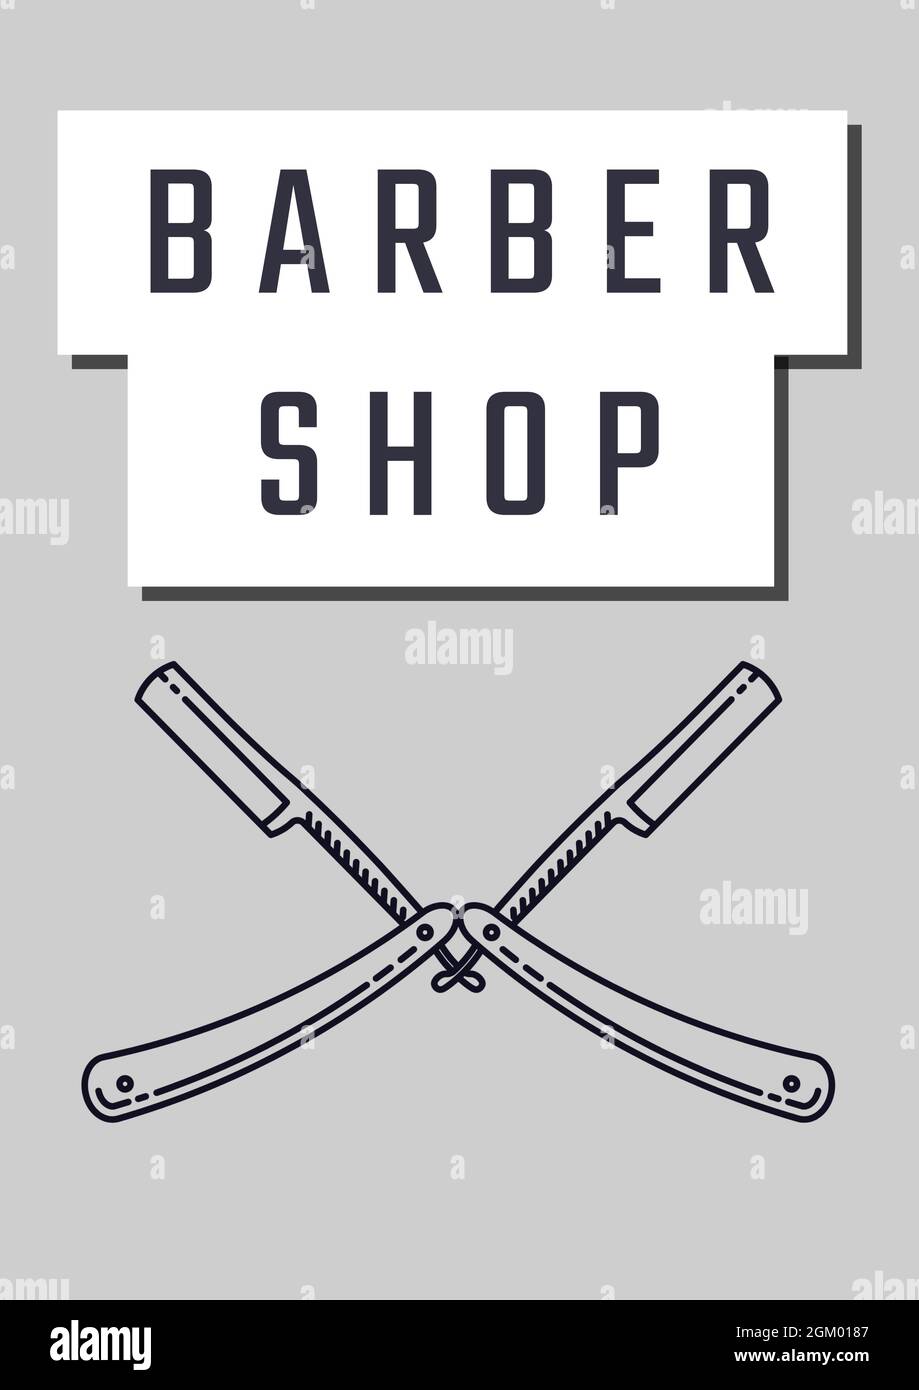 Barber shop text banner with two straight blade razors icons against grey background Stock Photo